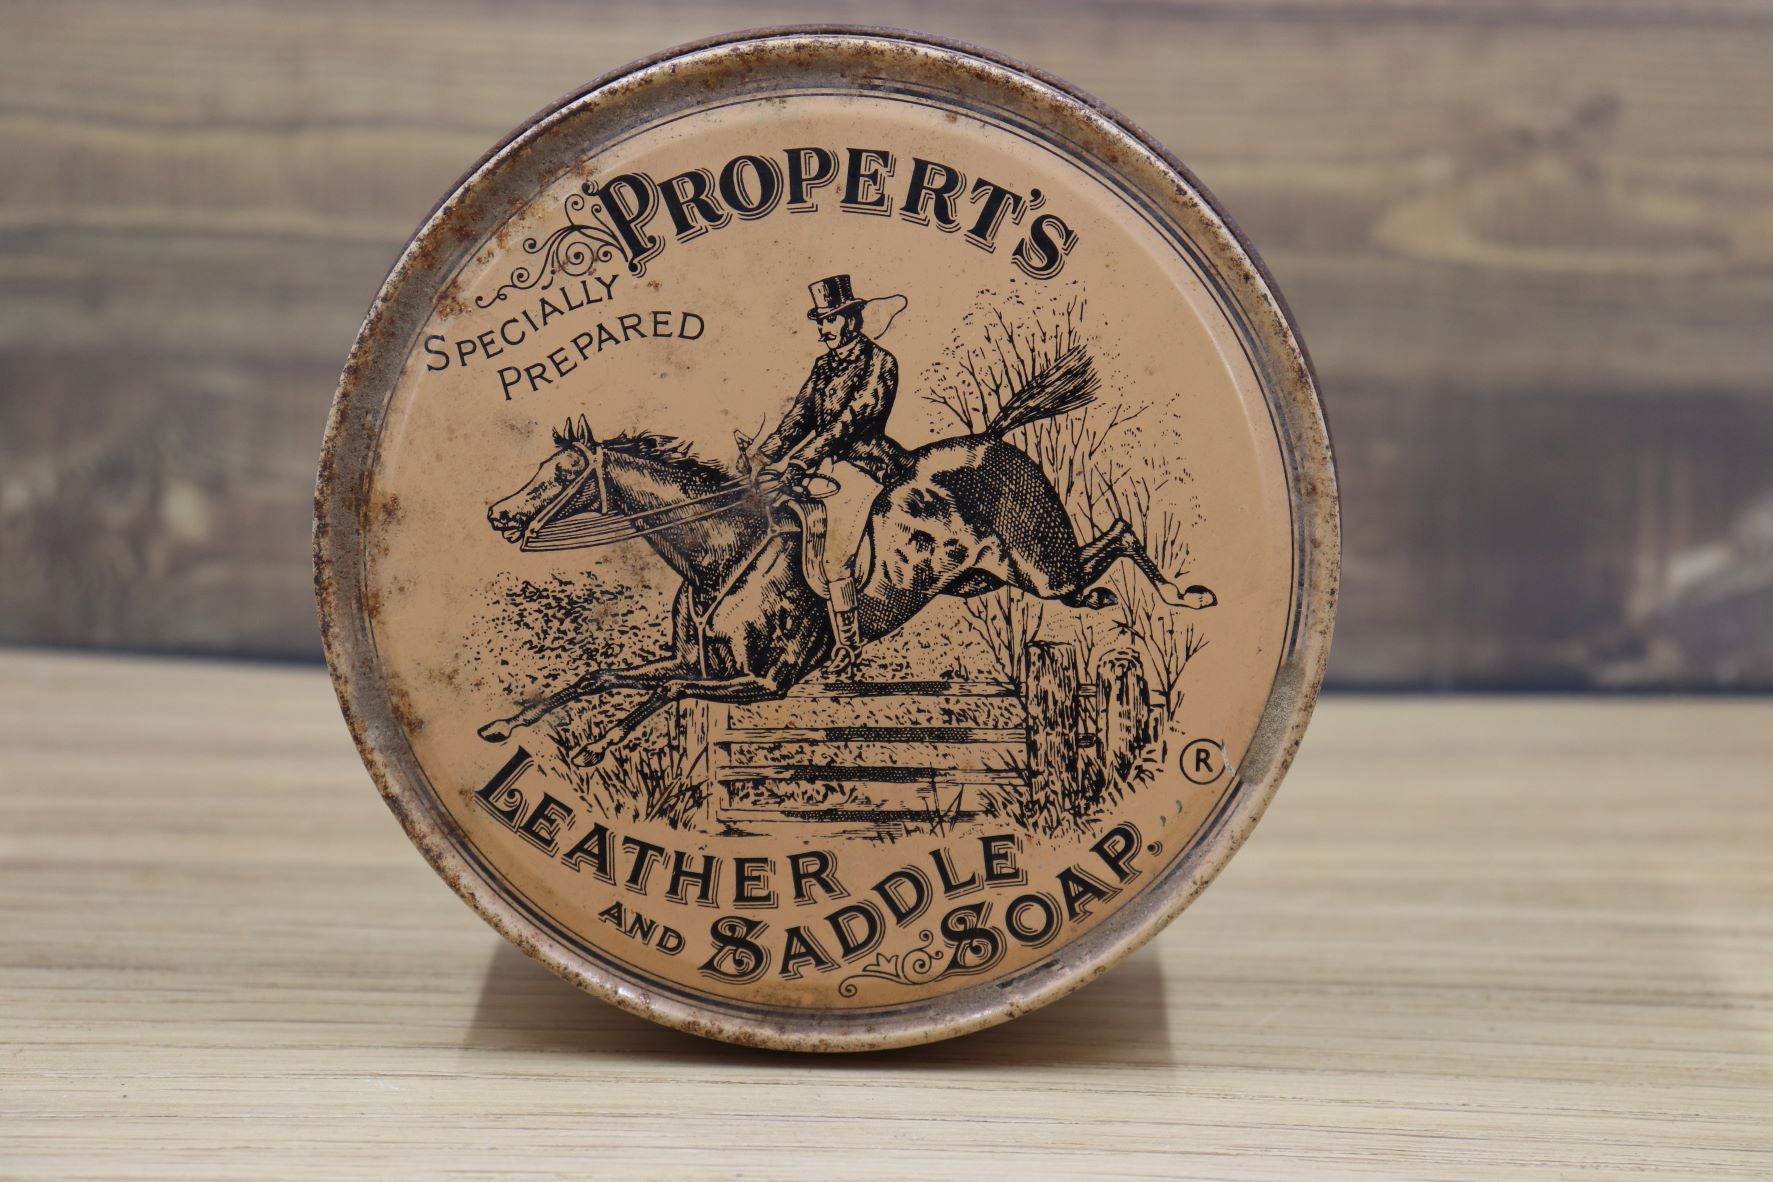 Propert's Leather and Saddle Soap Tin